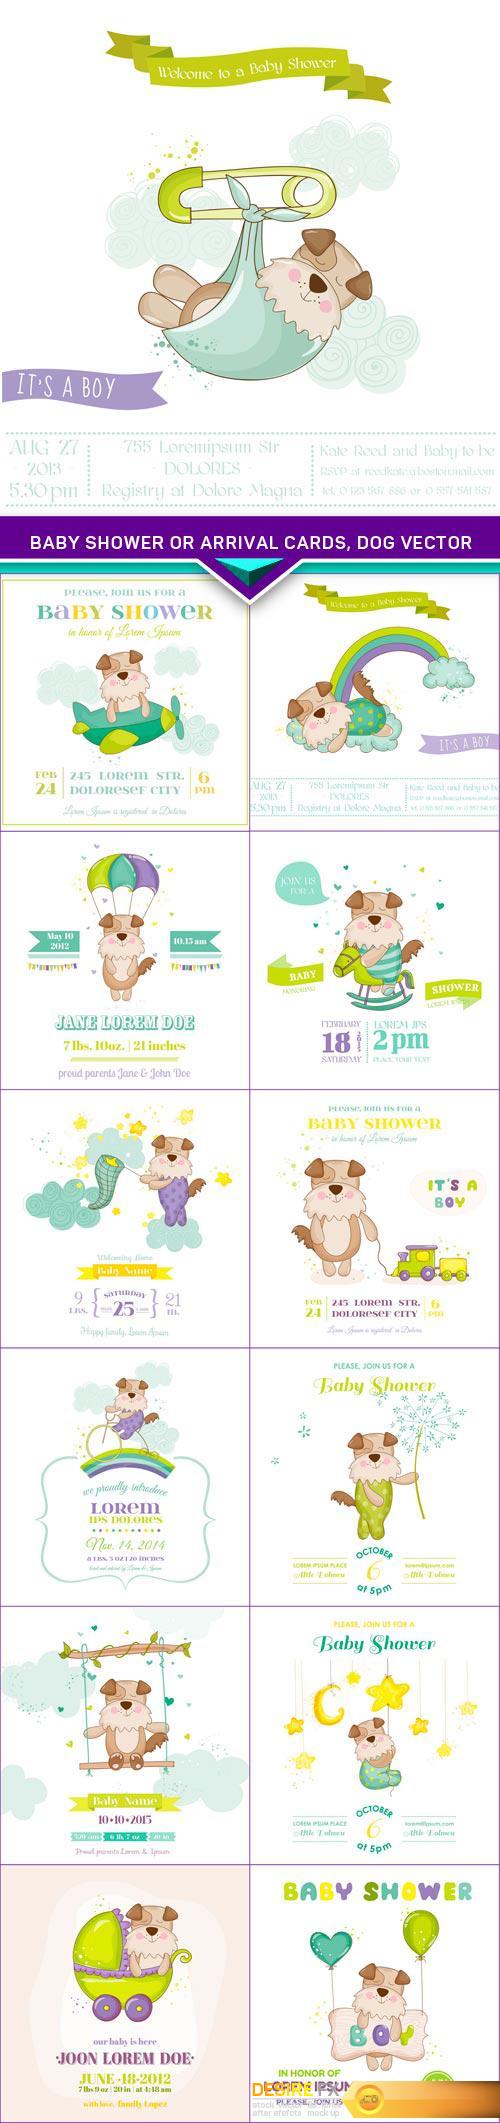 Baby Shower or Arrival Cards, Dog vector 13x EPS